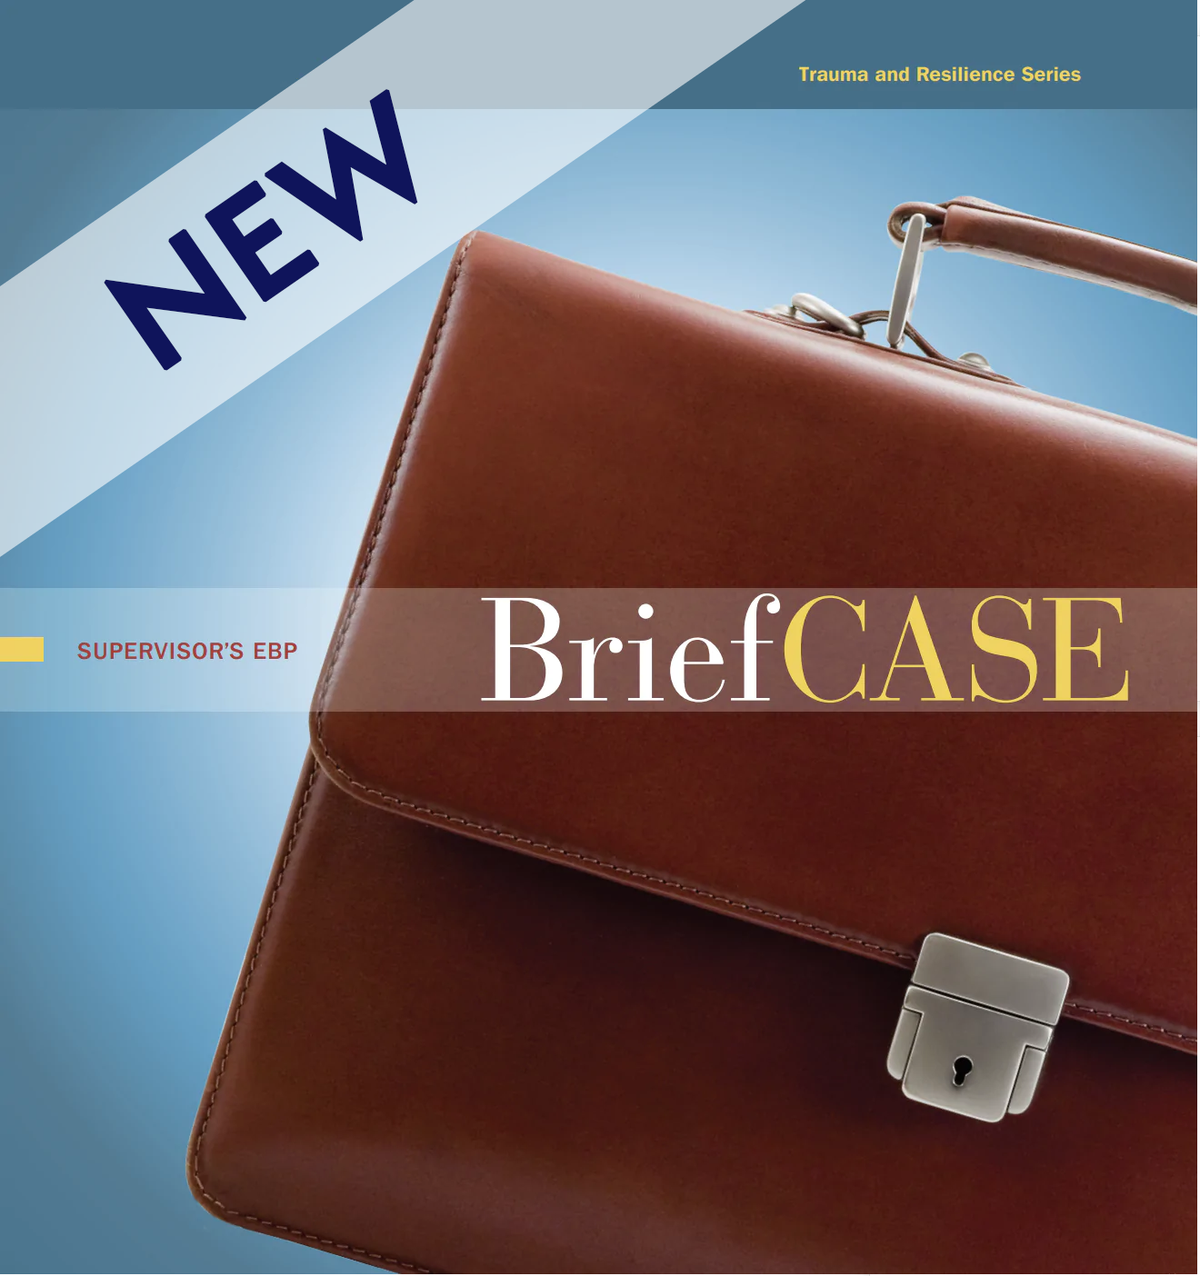 Supervisor’s EBP BriefCASE Supplemental Set: Trauma and Resilience Series